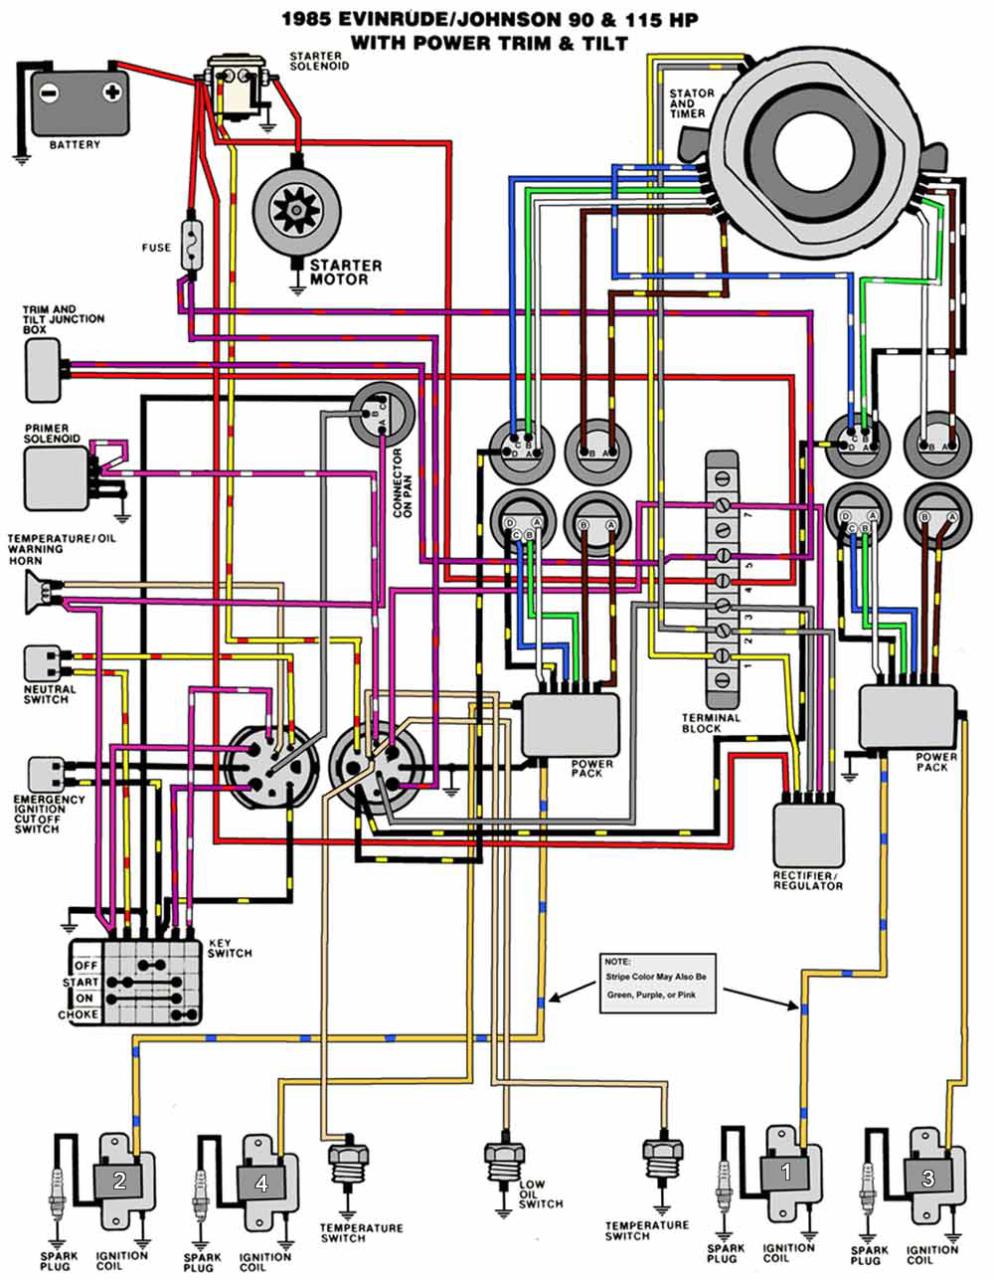 1992 Johnson 40 Hp Outboard Wiring Diagram